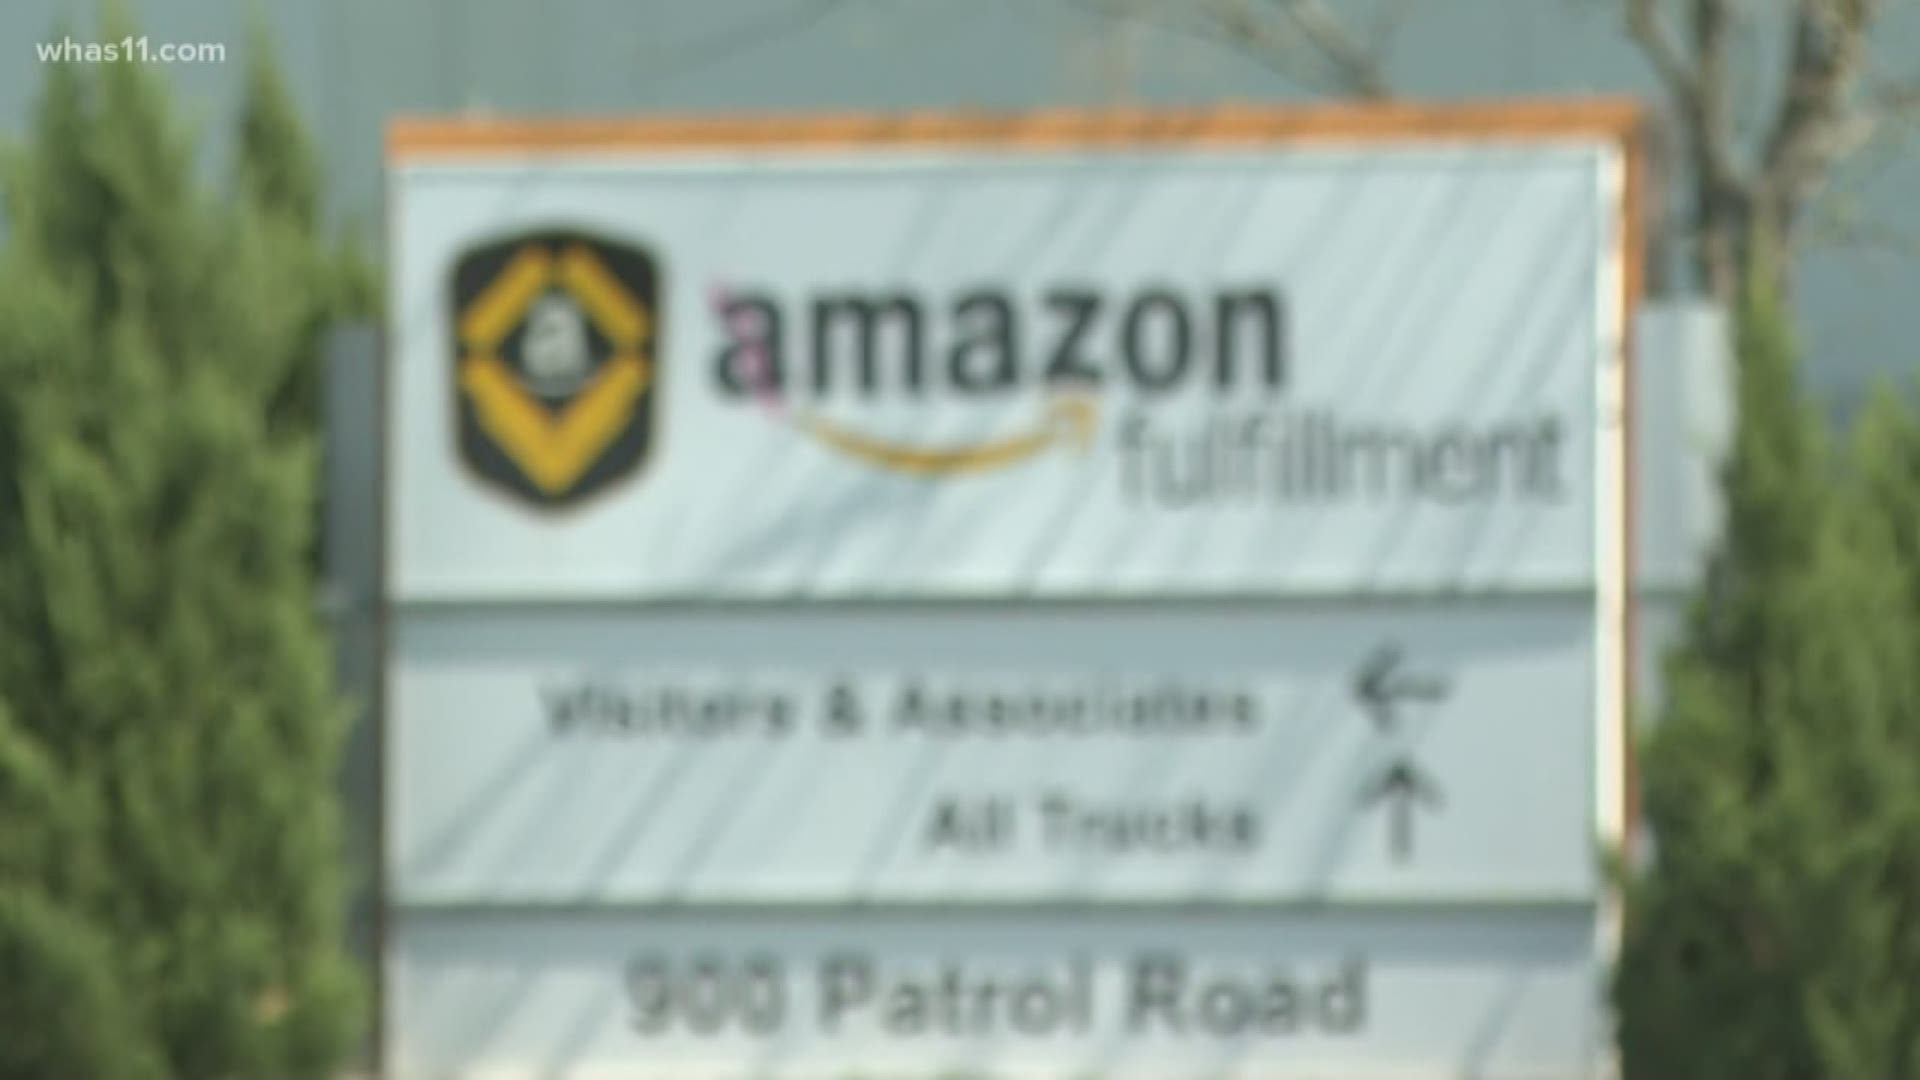 In a statement Amazon said it's taking extreme measures to protect employees.